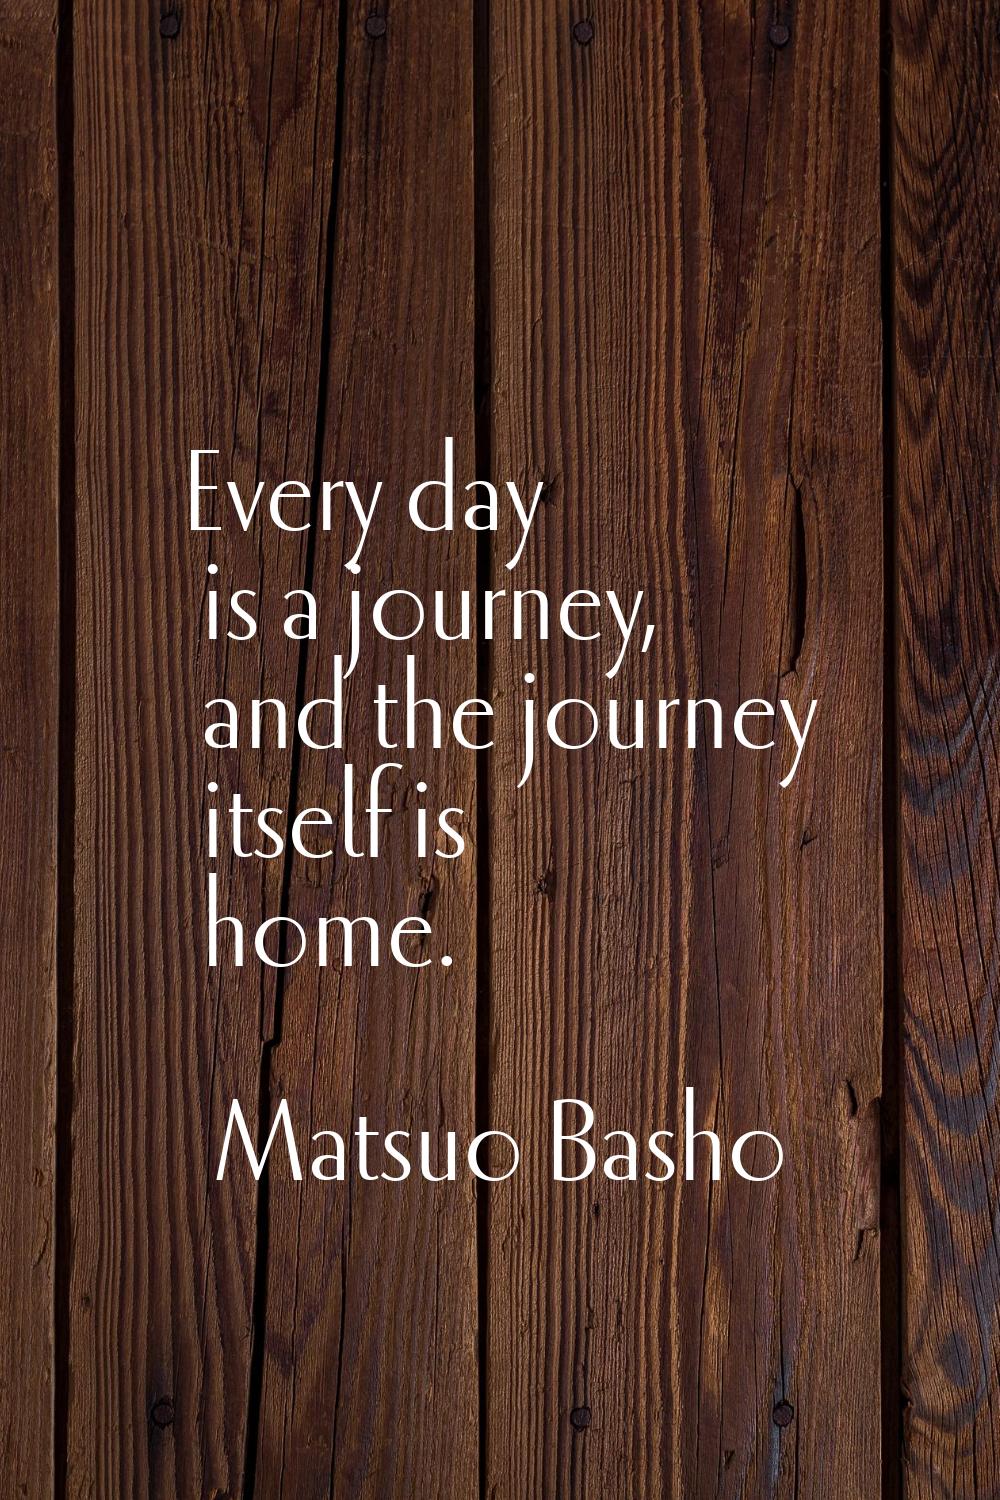 Every day is a journey, and the journey itself is home.